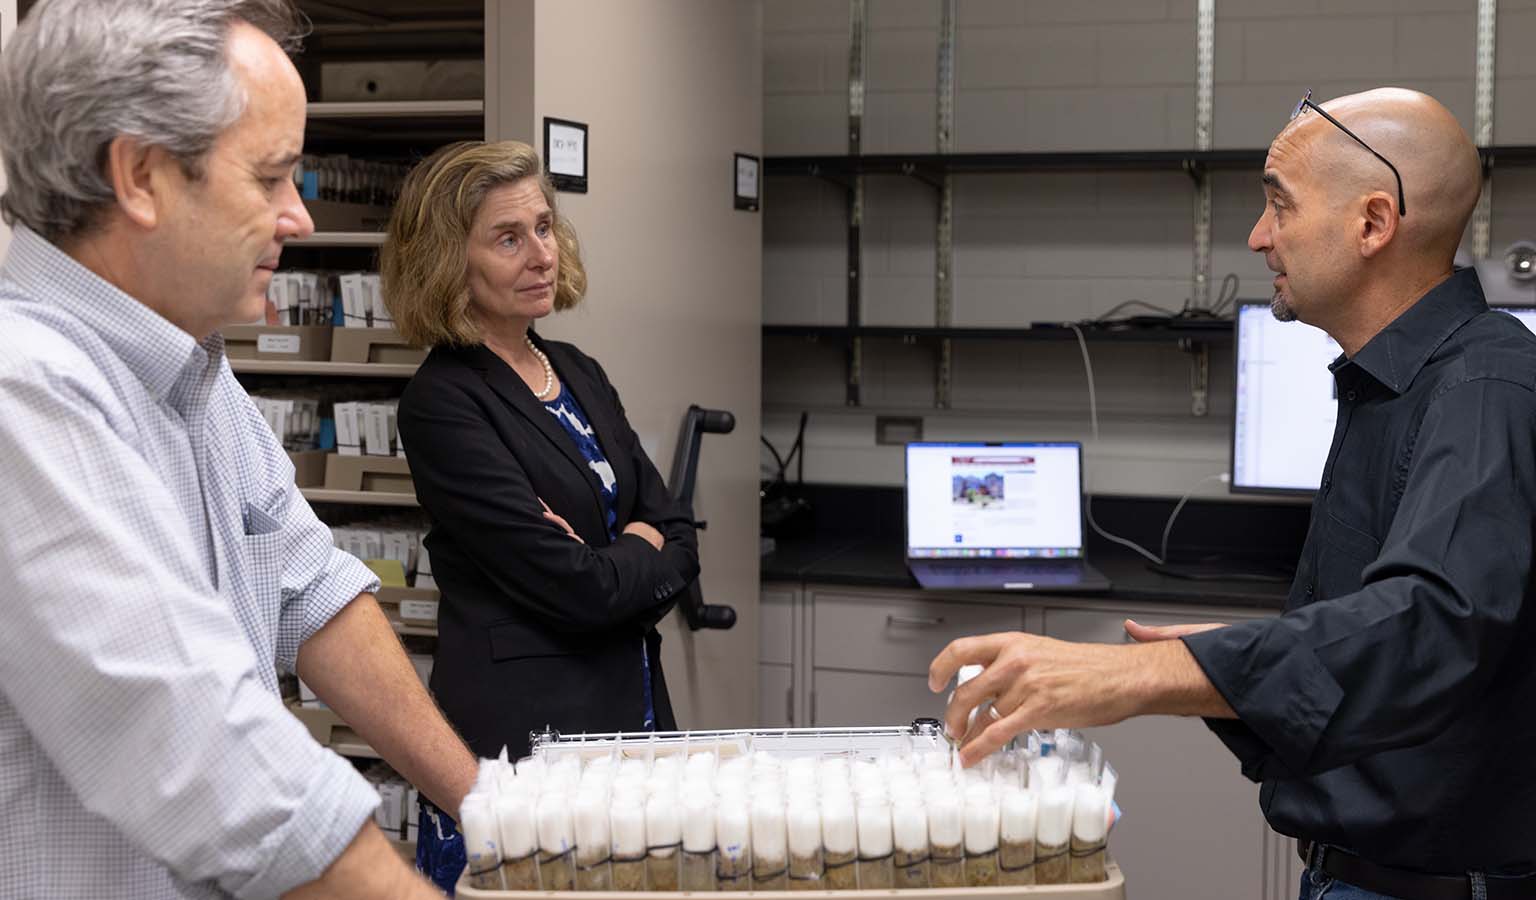 Kevin Cook (left) looks on as Andy Zelhof (right) talks to Pamela Whitten. Cook has brought out a cart with a large tray of cotton-topped vials with living fly cultures.